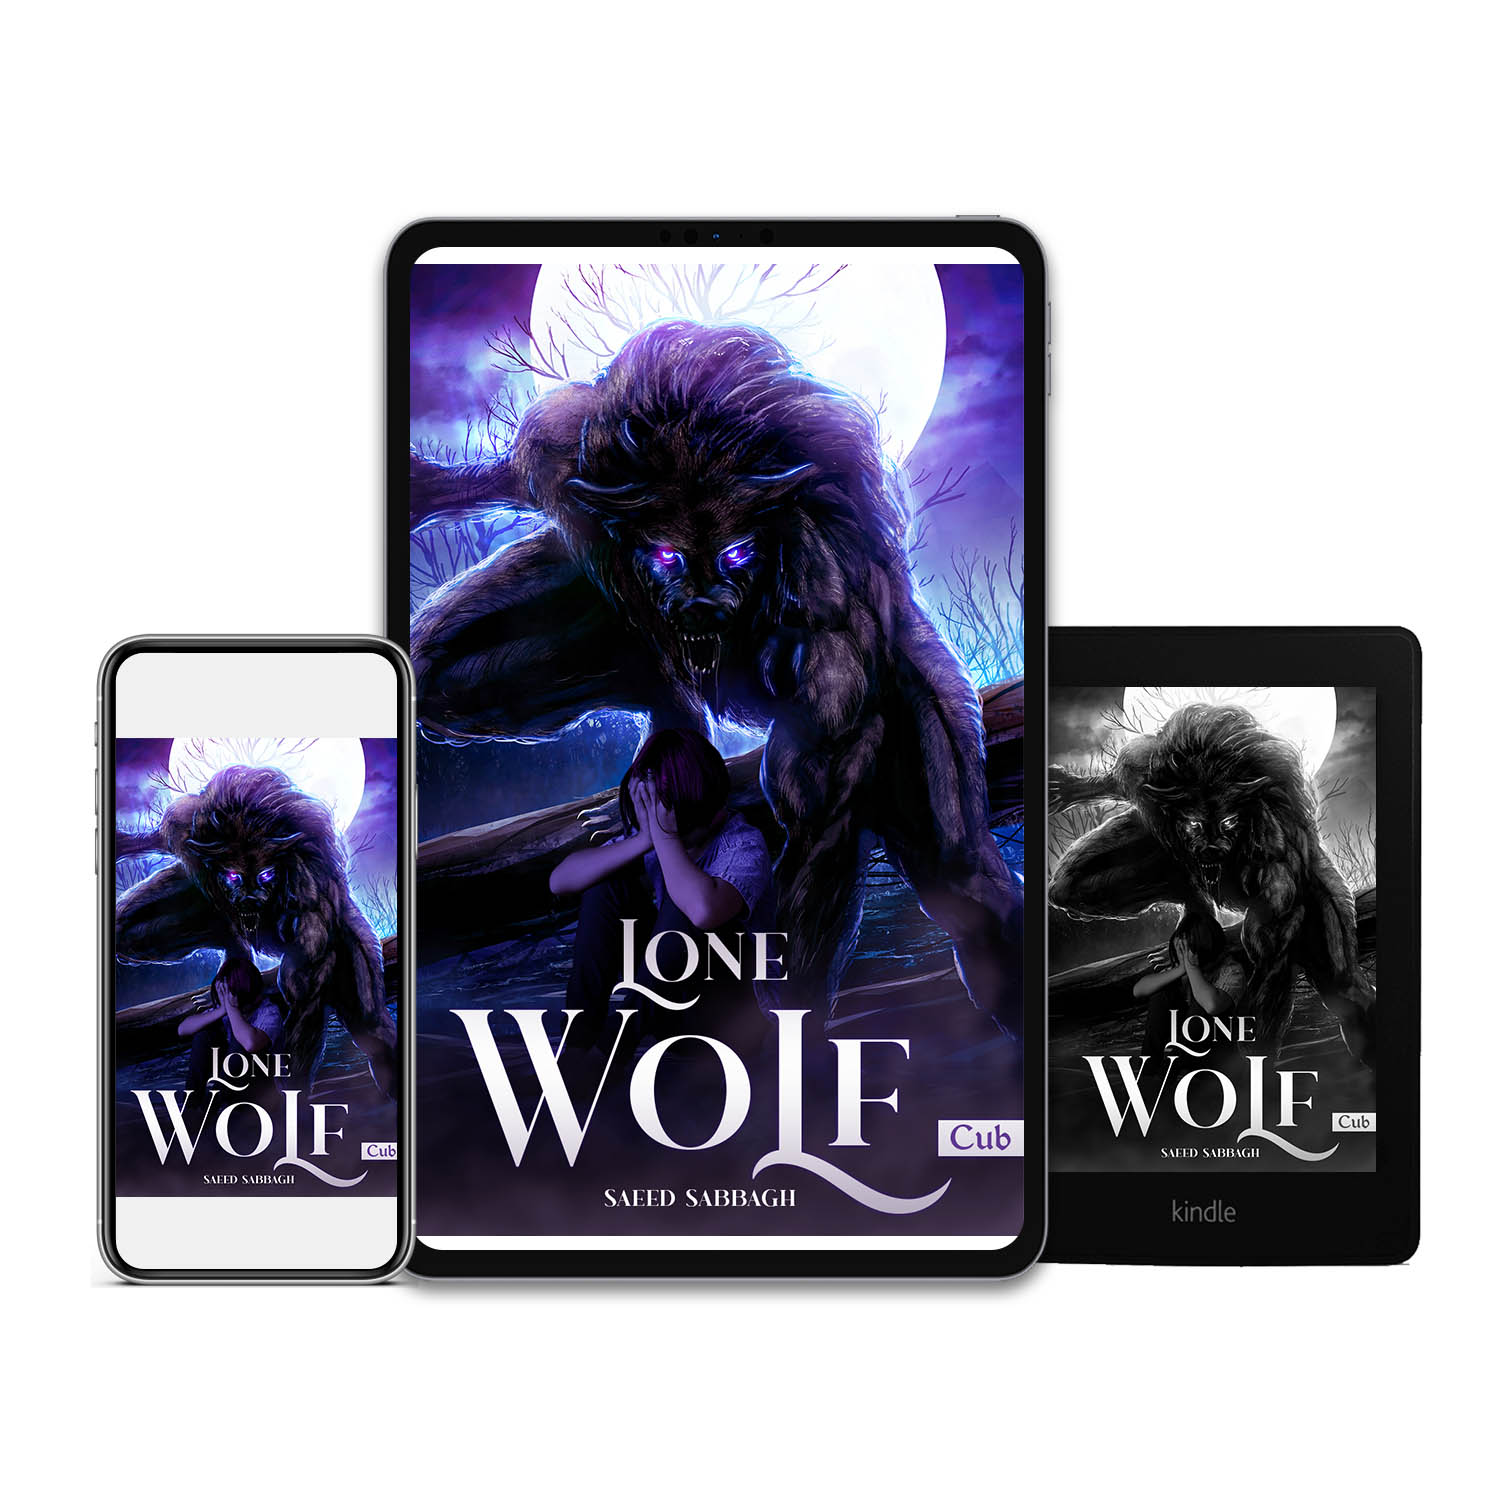 bookconsilio-bookcover-lone-wolf-saeed-sabbagh-ebookcoverdesign-